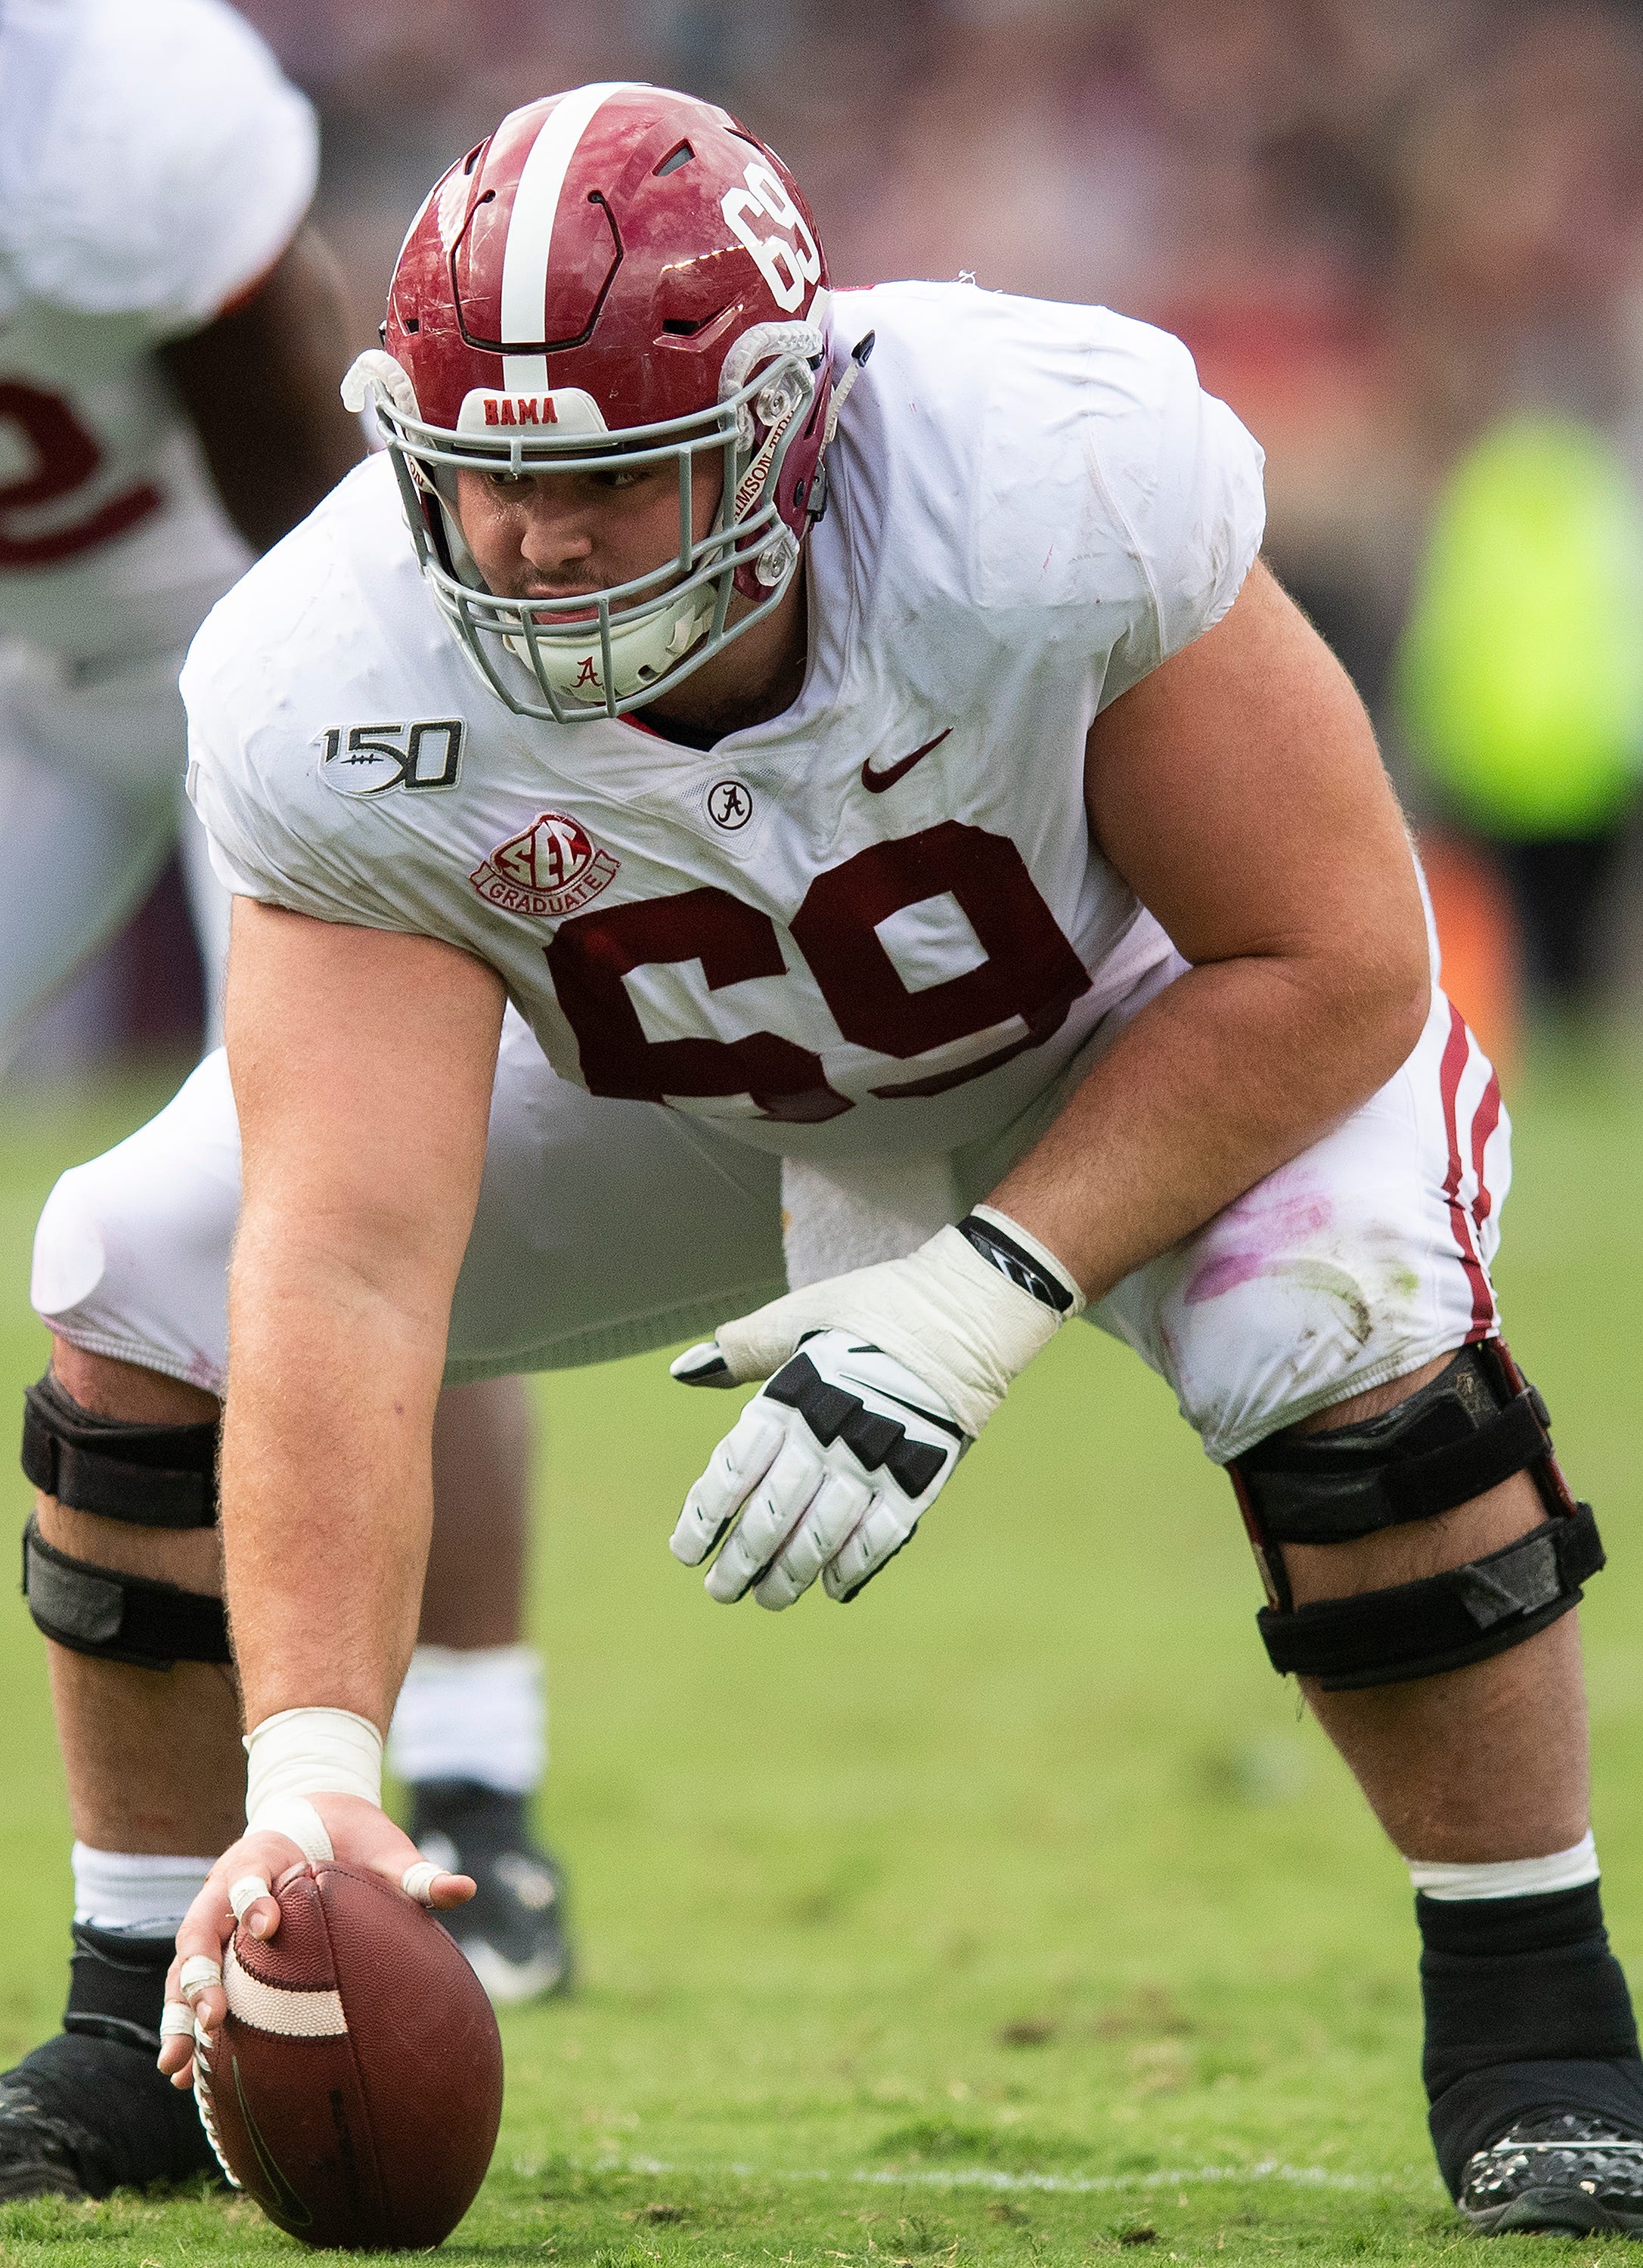 Alabama center Landon Dickerson (69) against Texas A&M at Kyle Field in College Station, Texas on Saturday October 12, 2019.